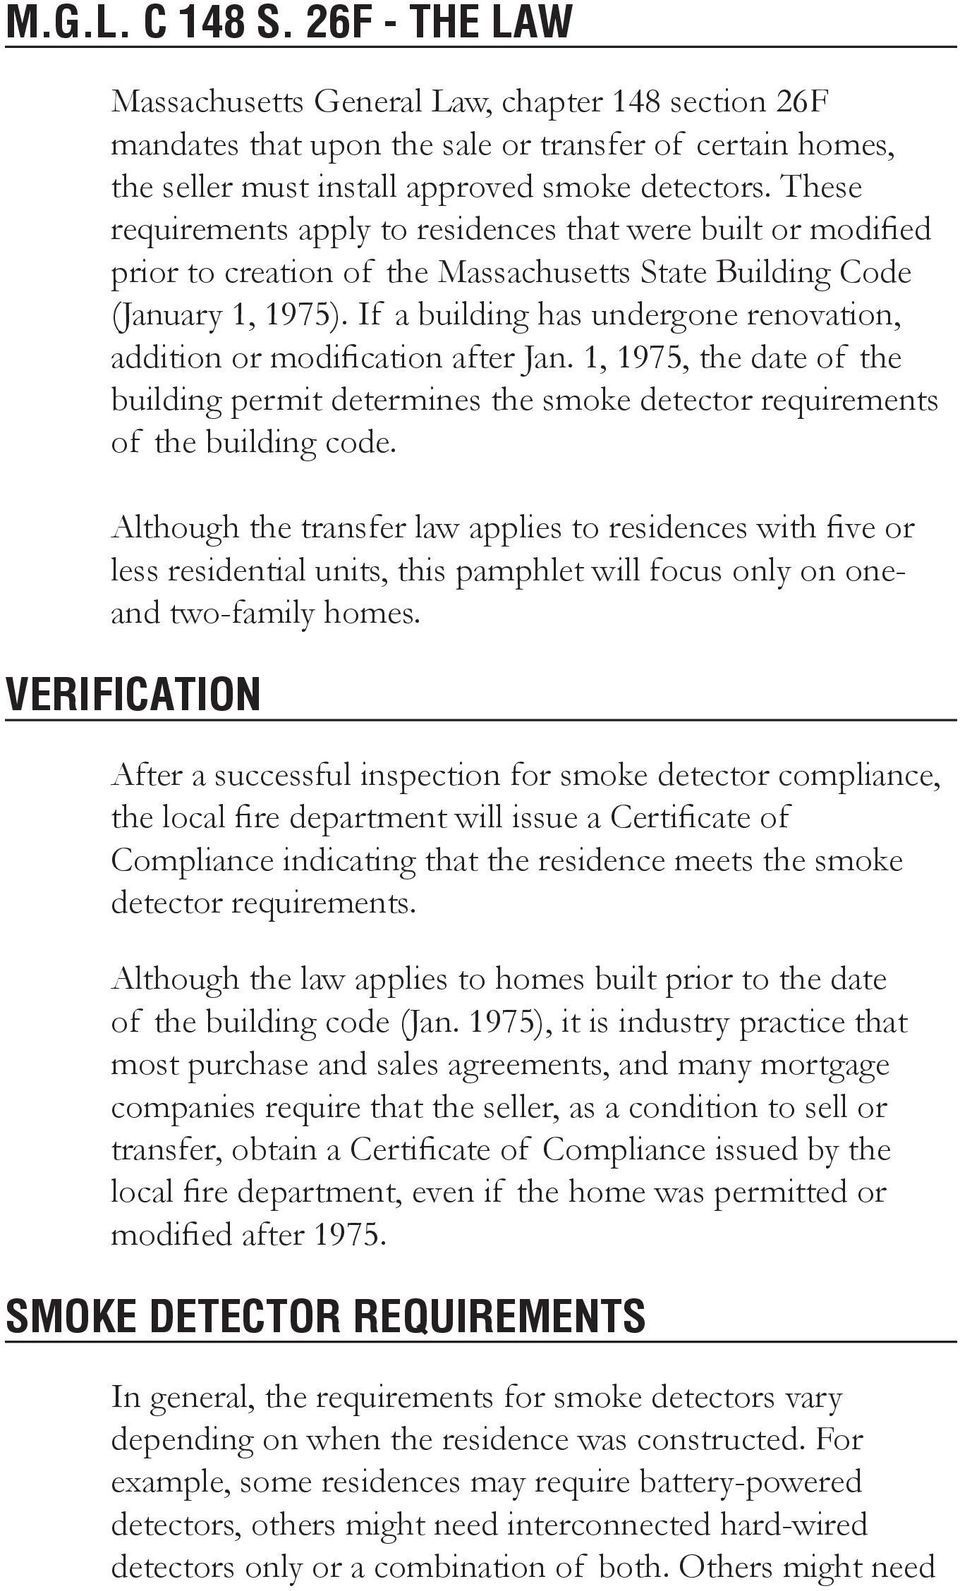 If a building has undergone renovation, addition or modification after Jan. 1, 1975, the date of the building permit determines the smoke detector requirements of the building code.